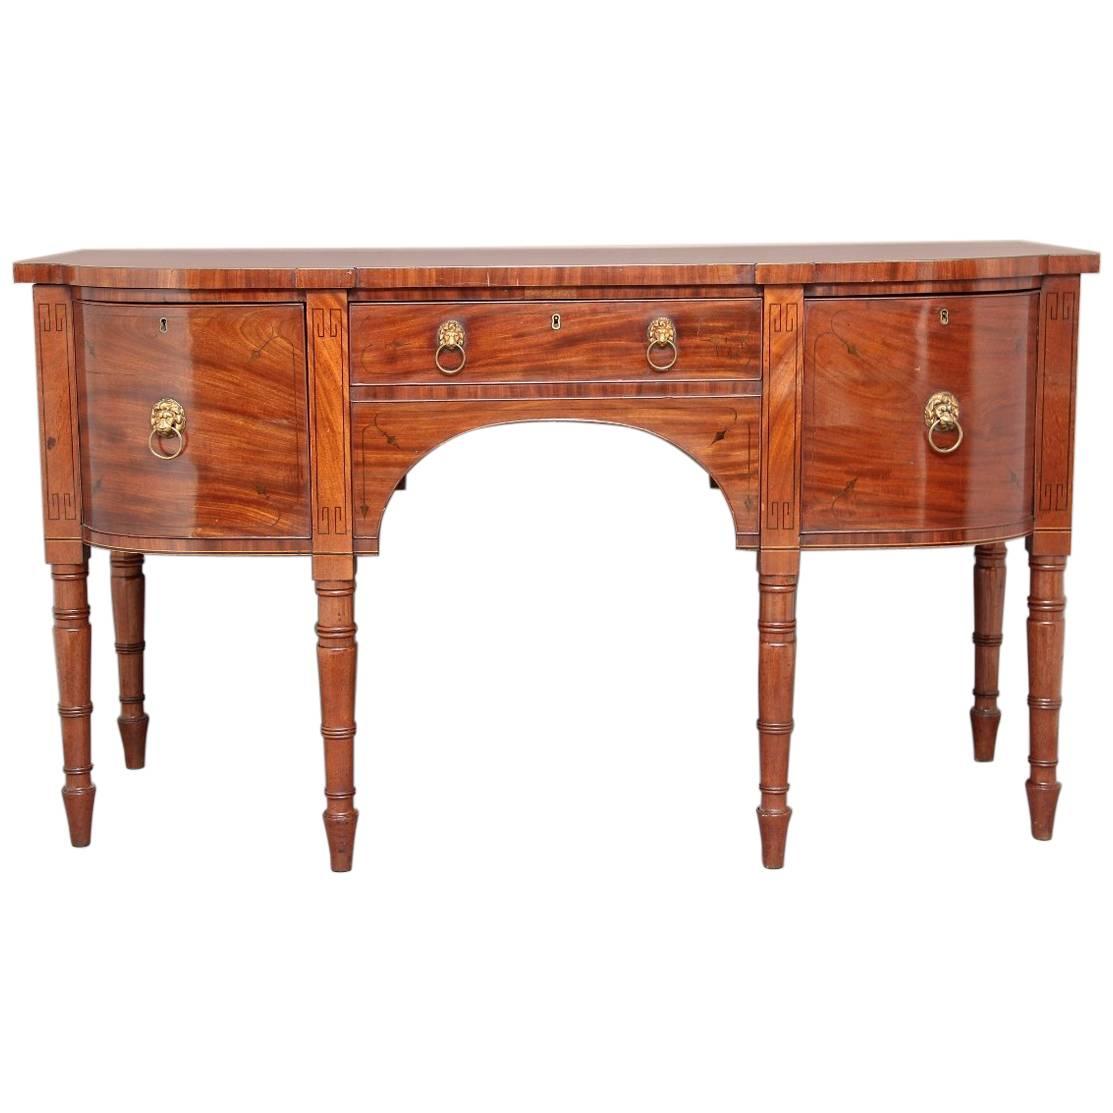 19th Century Mahogany Inlaid Bow Ended Sideboard